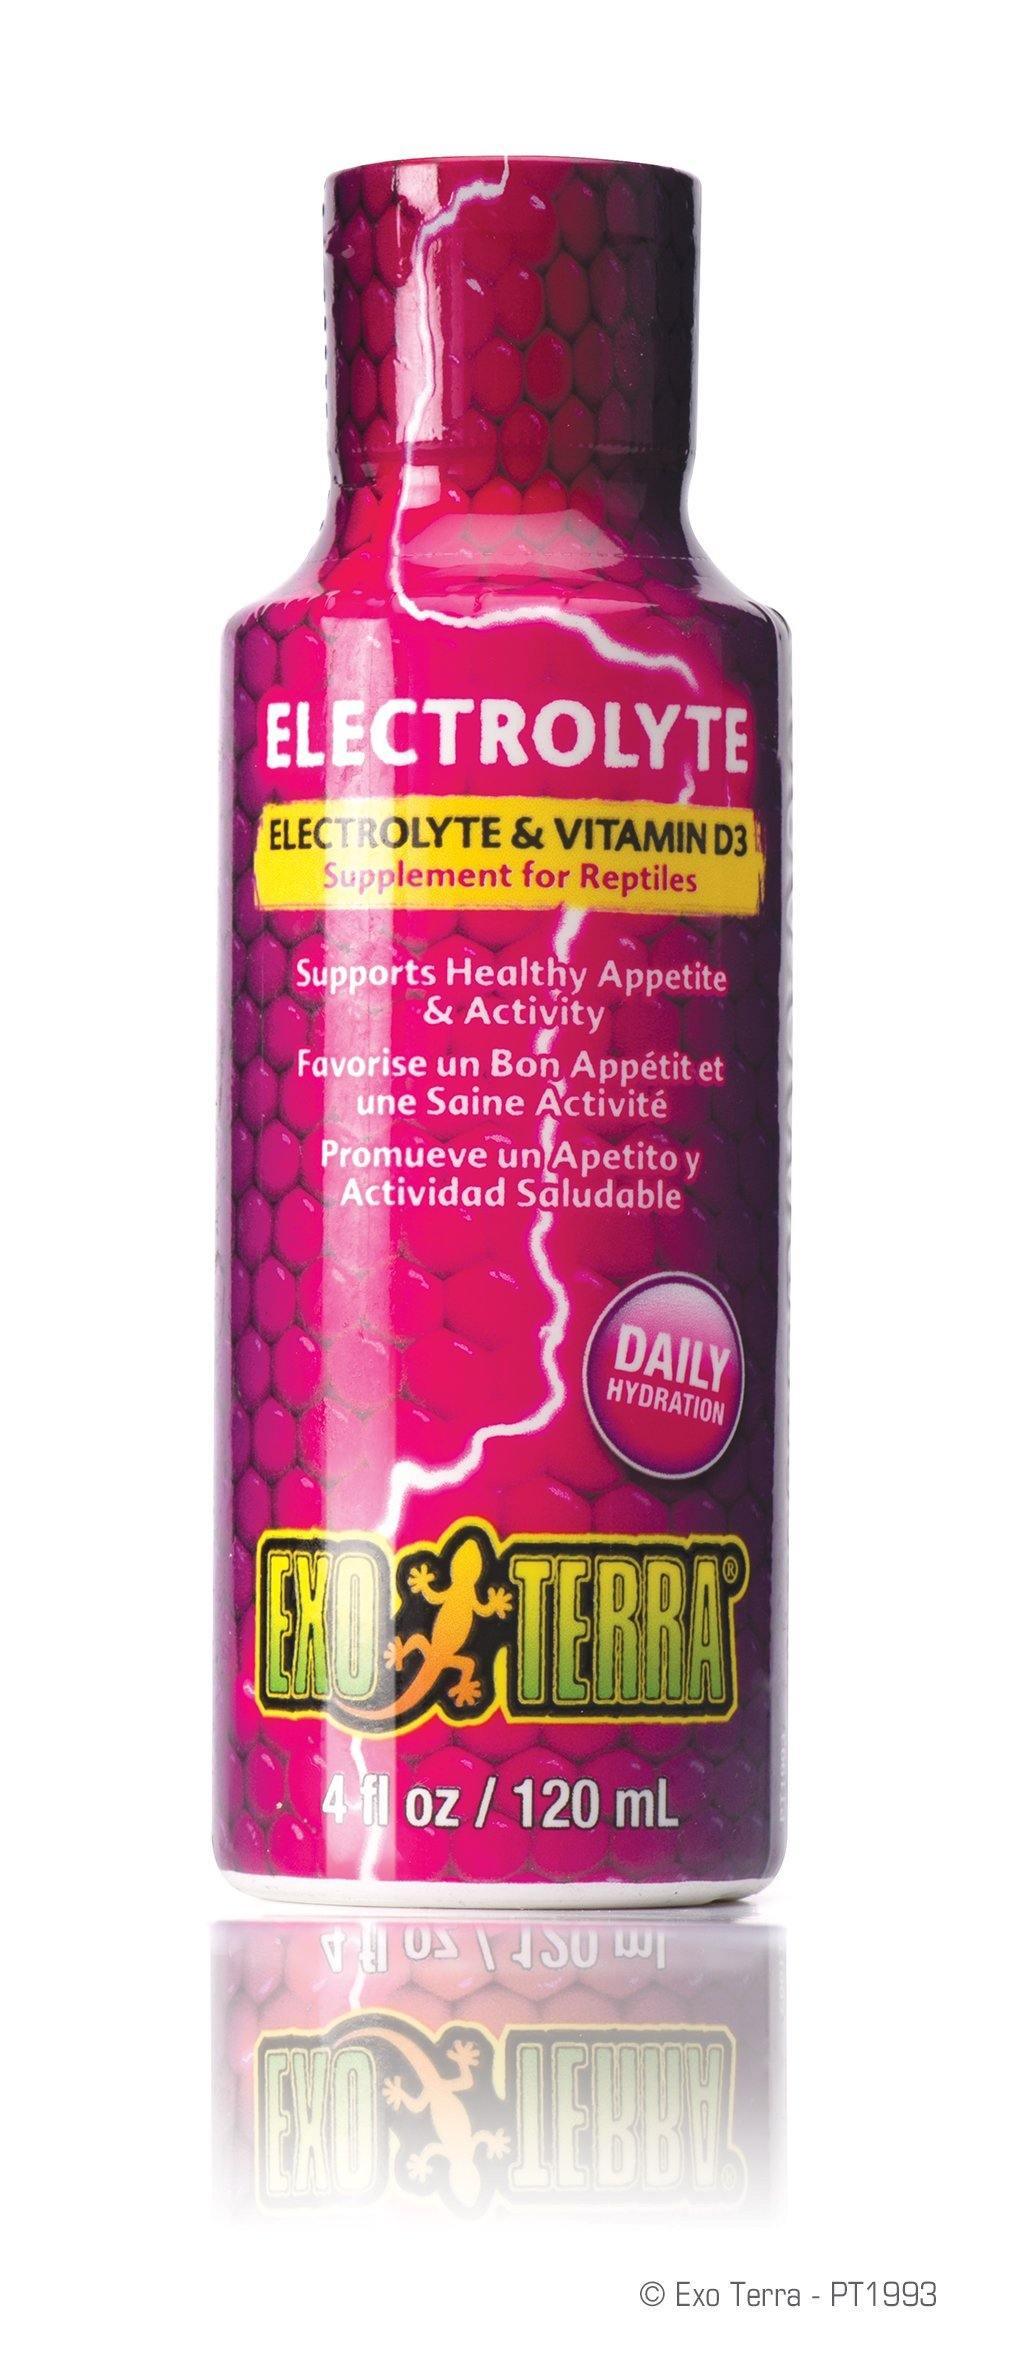 Exo Terra Electrolyte and Vitamin D3 Supplement - Amazing Amazon